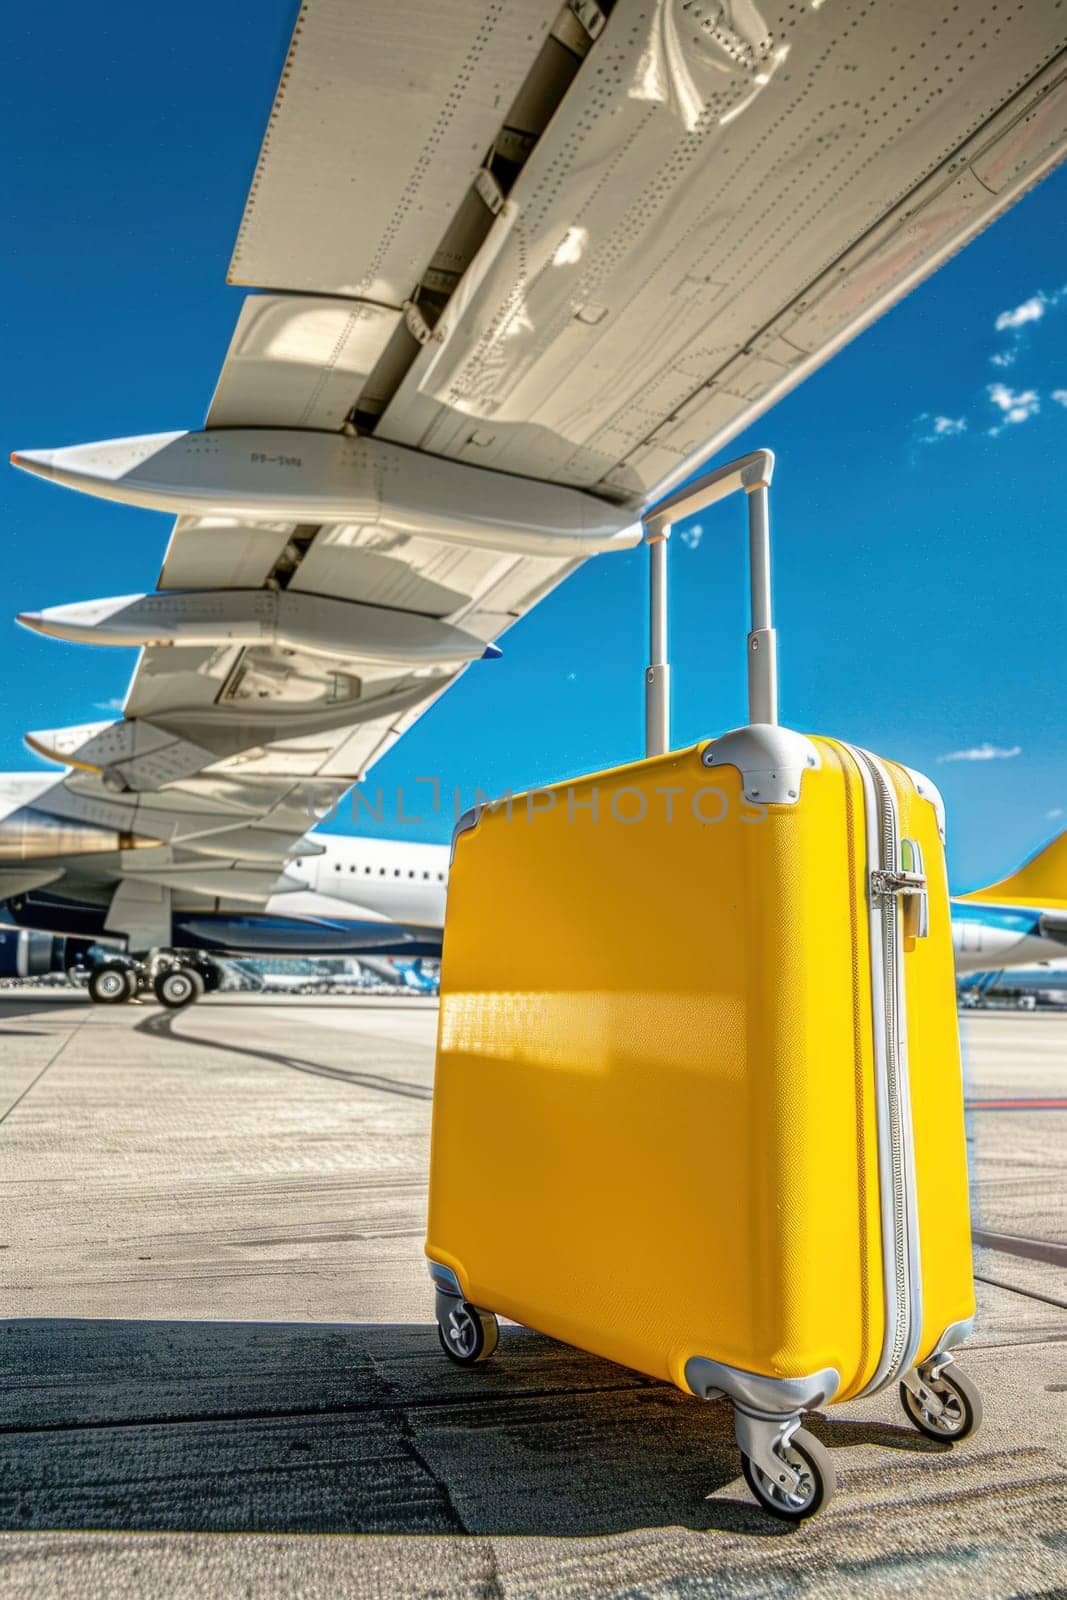 Yellow suitcase traveling alongside a large airplane on the tarmac